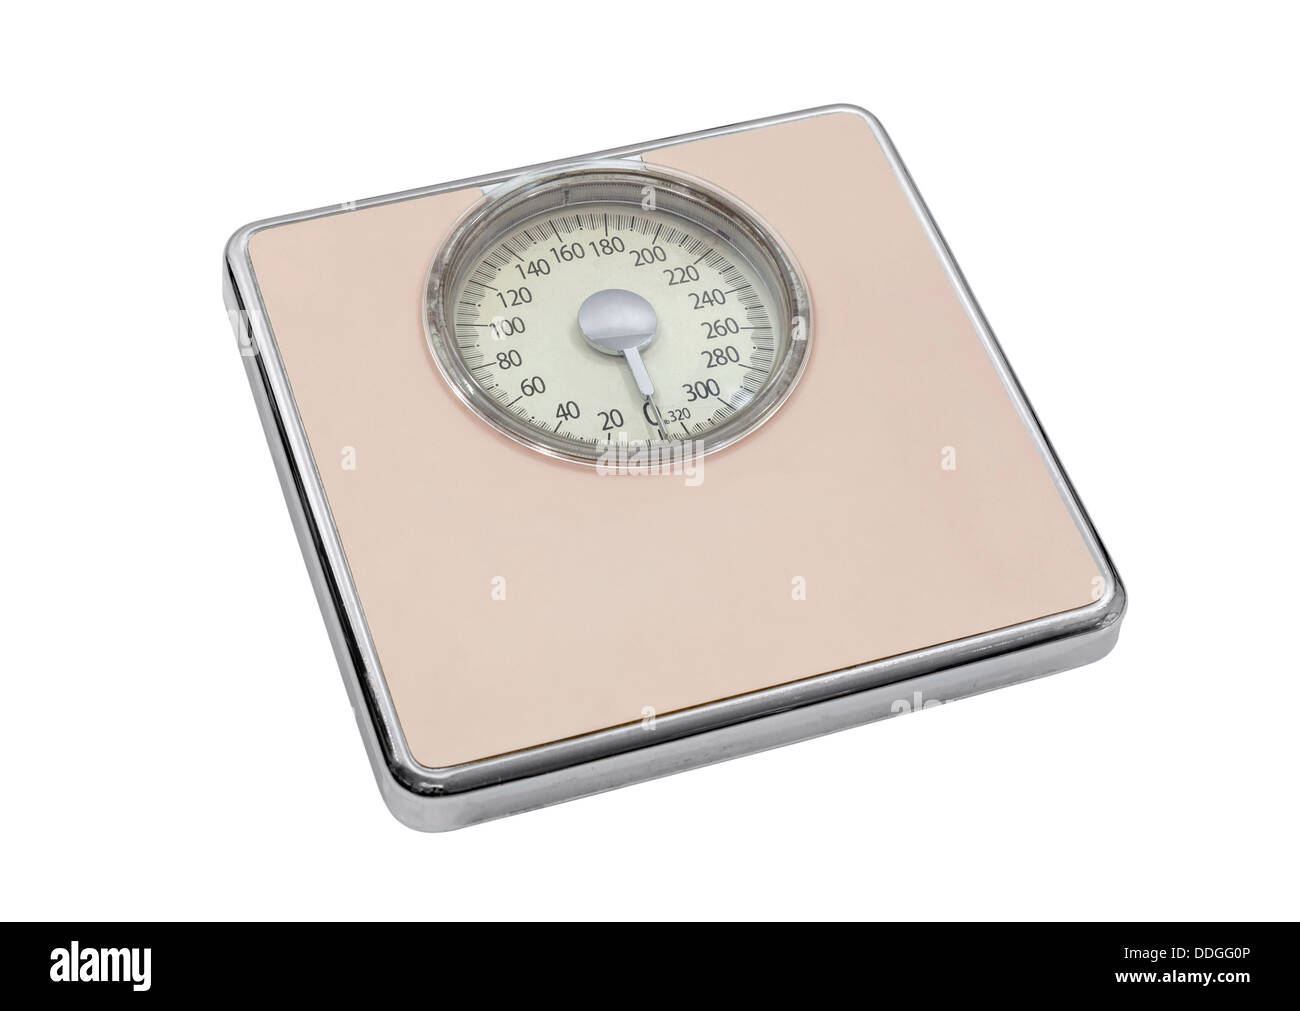 Analog weight scale isolated Stock Photo by ©prapass 9138178